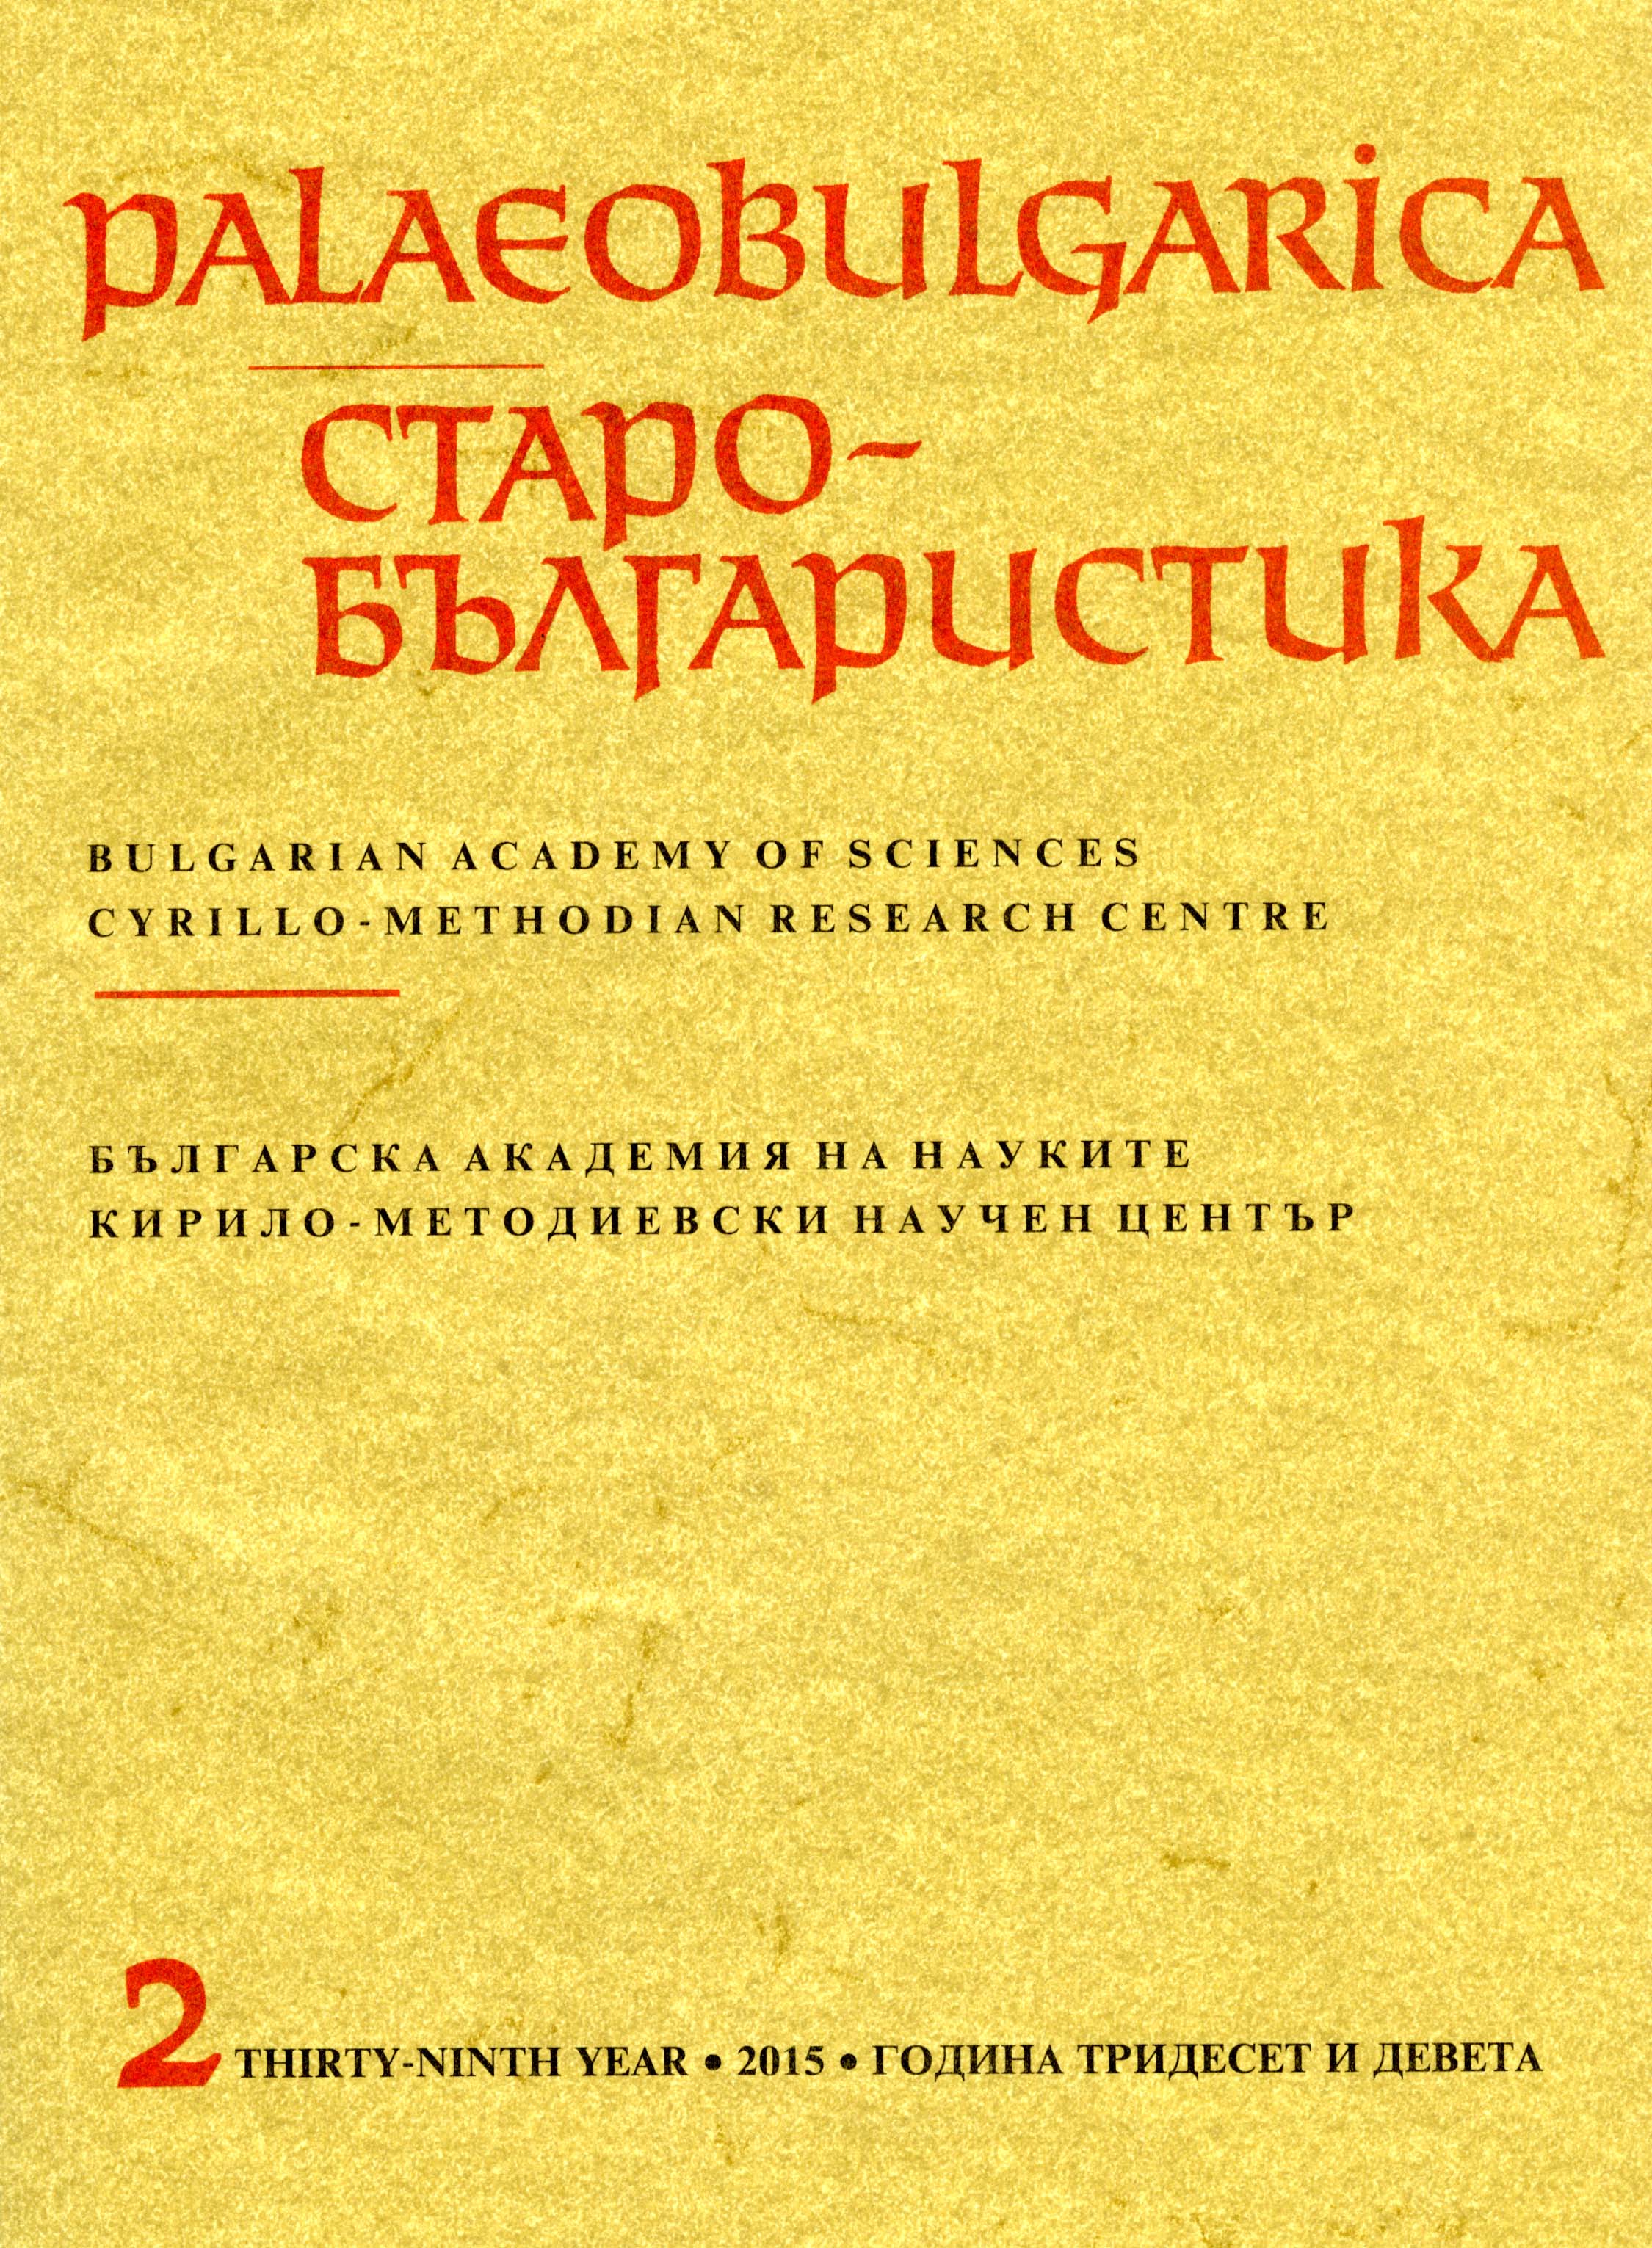 Roman or Byzantine Liturgy? Theological Terminology in the VITA METHODII Cover Image